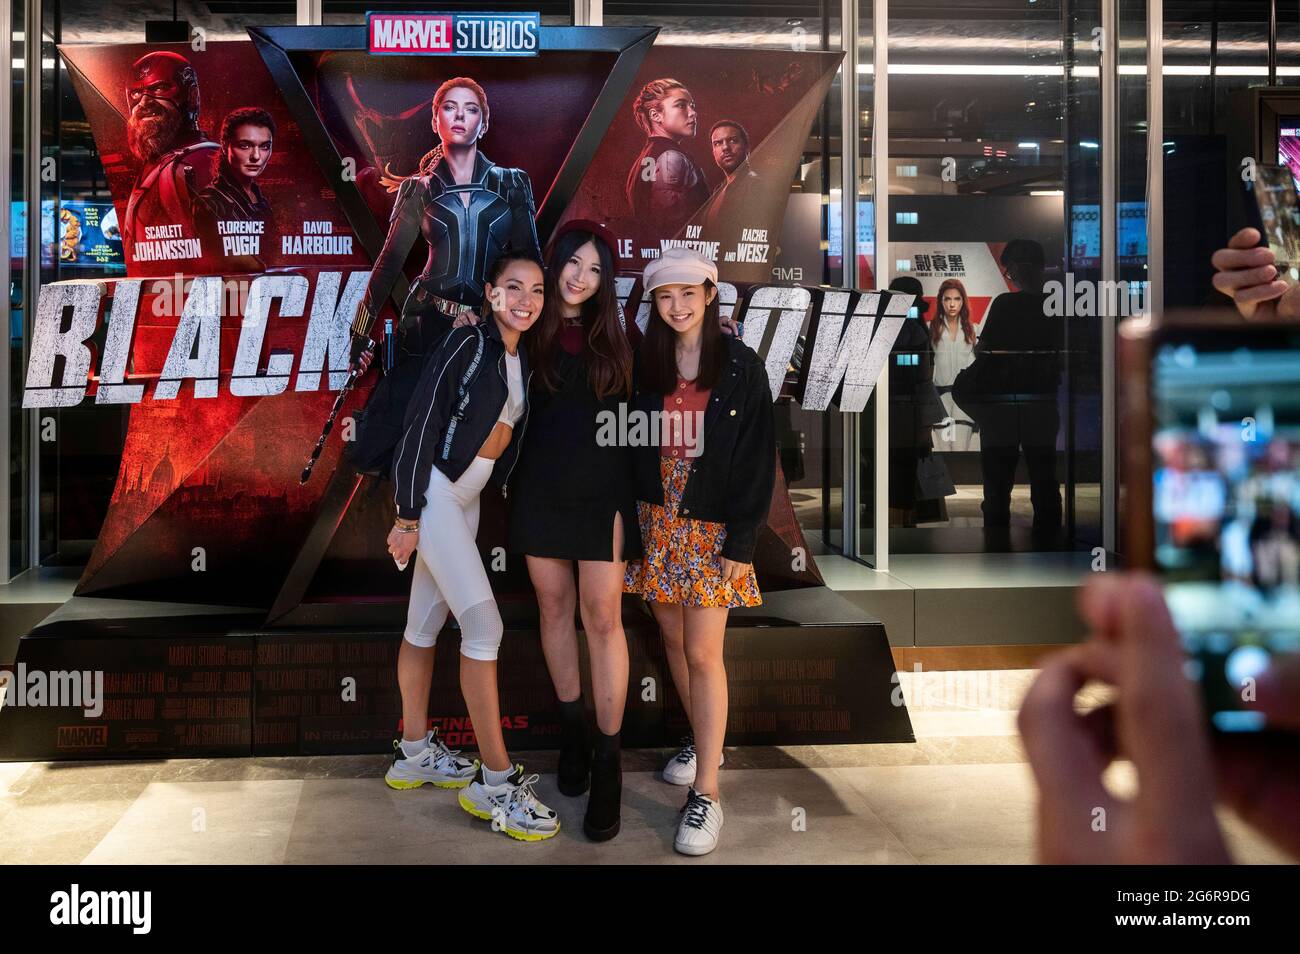 Hong Kong, China. 07th July, 2021. Spectators pose in front of Disney's and Marvel Studios movie banner for the screening of Black Widow film, played by Scarlett Johansson, at a movie theater in Hong Kong. Credit: SOPA Images Limited/Alamy Live News Stock Photo